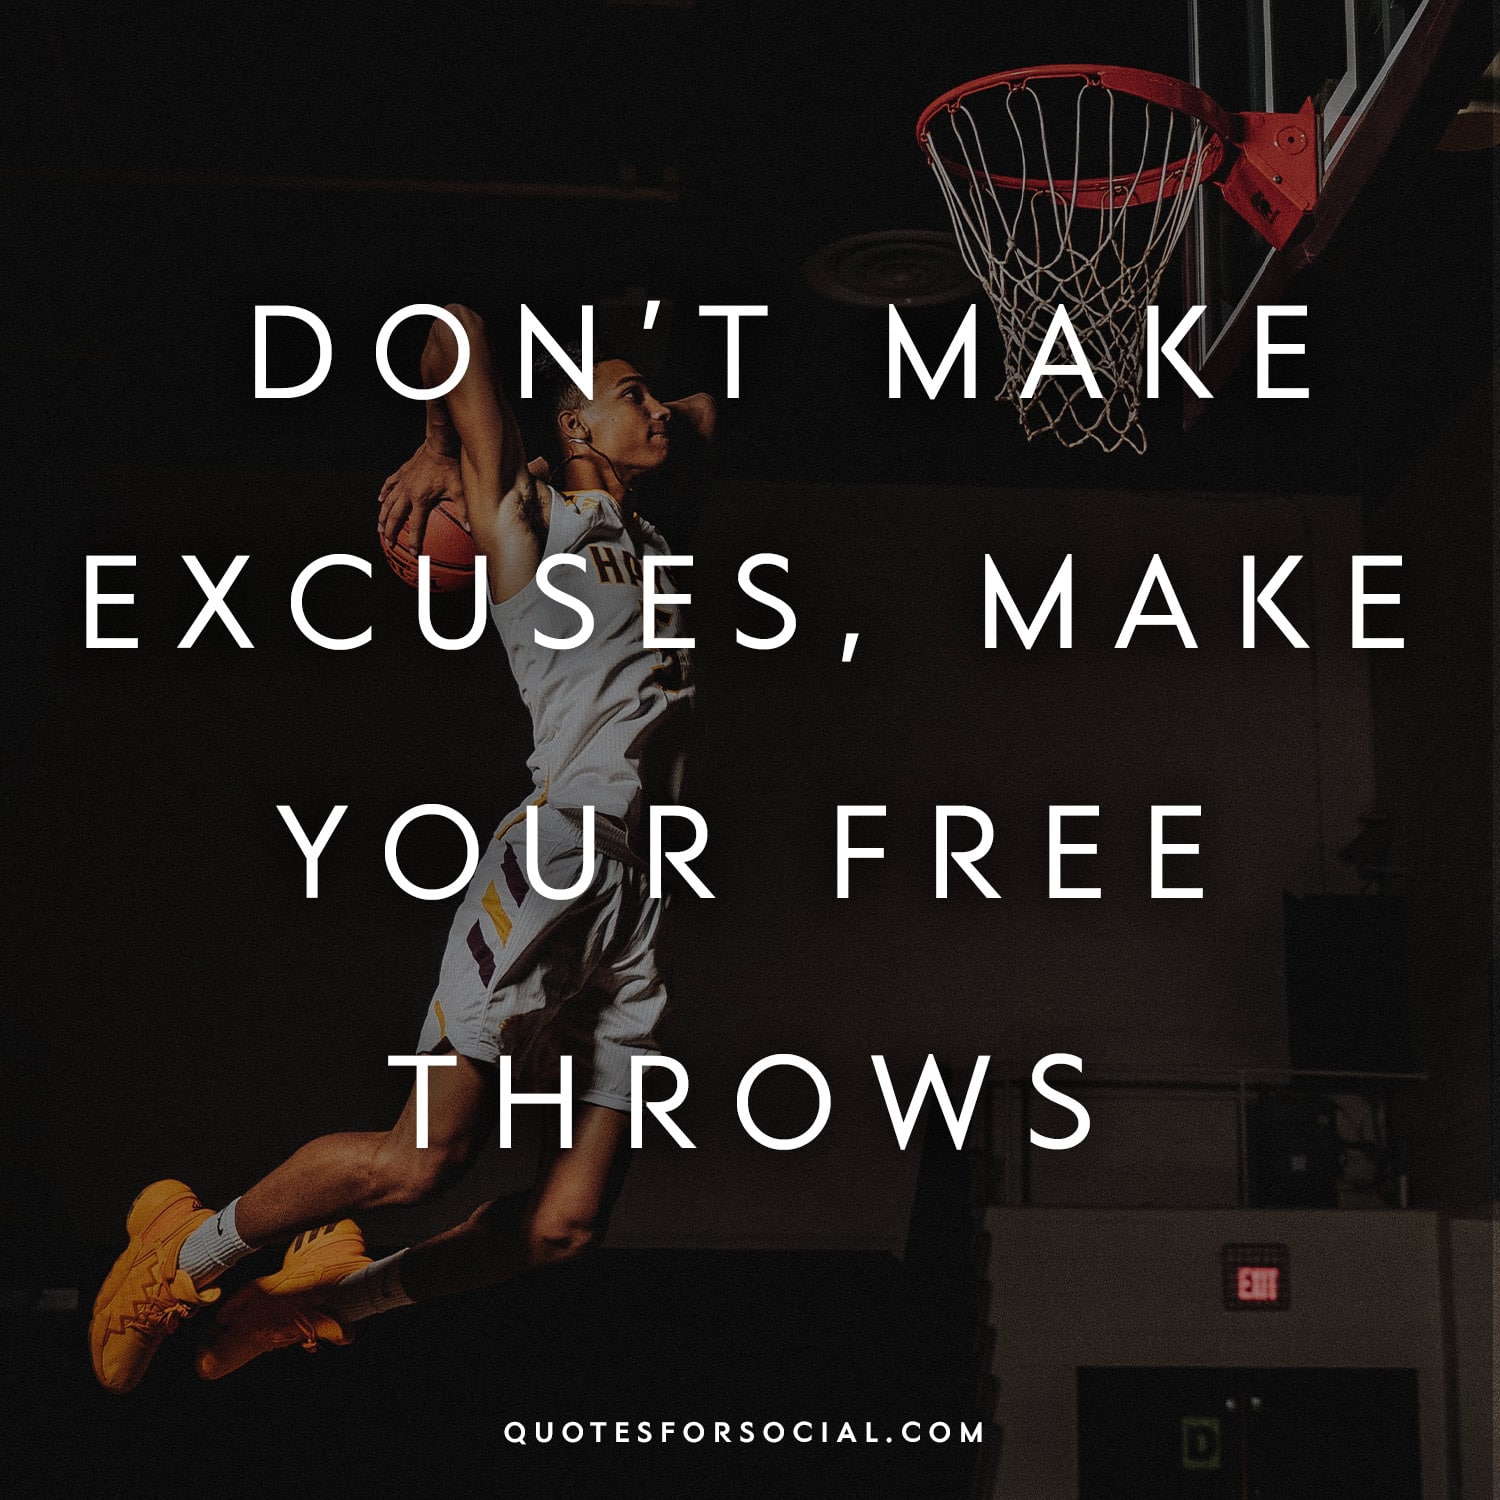 Basketball quotes for Instagram